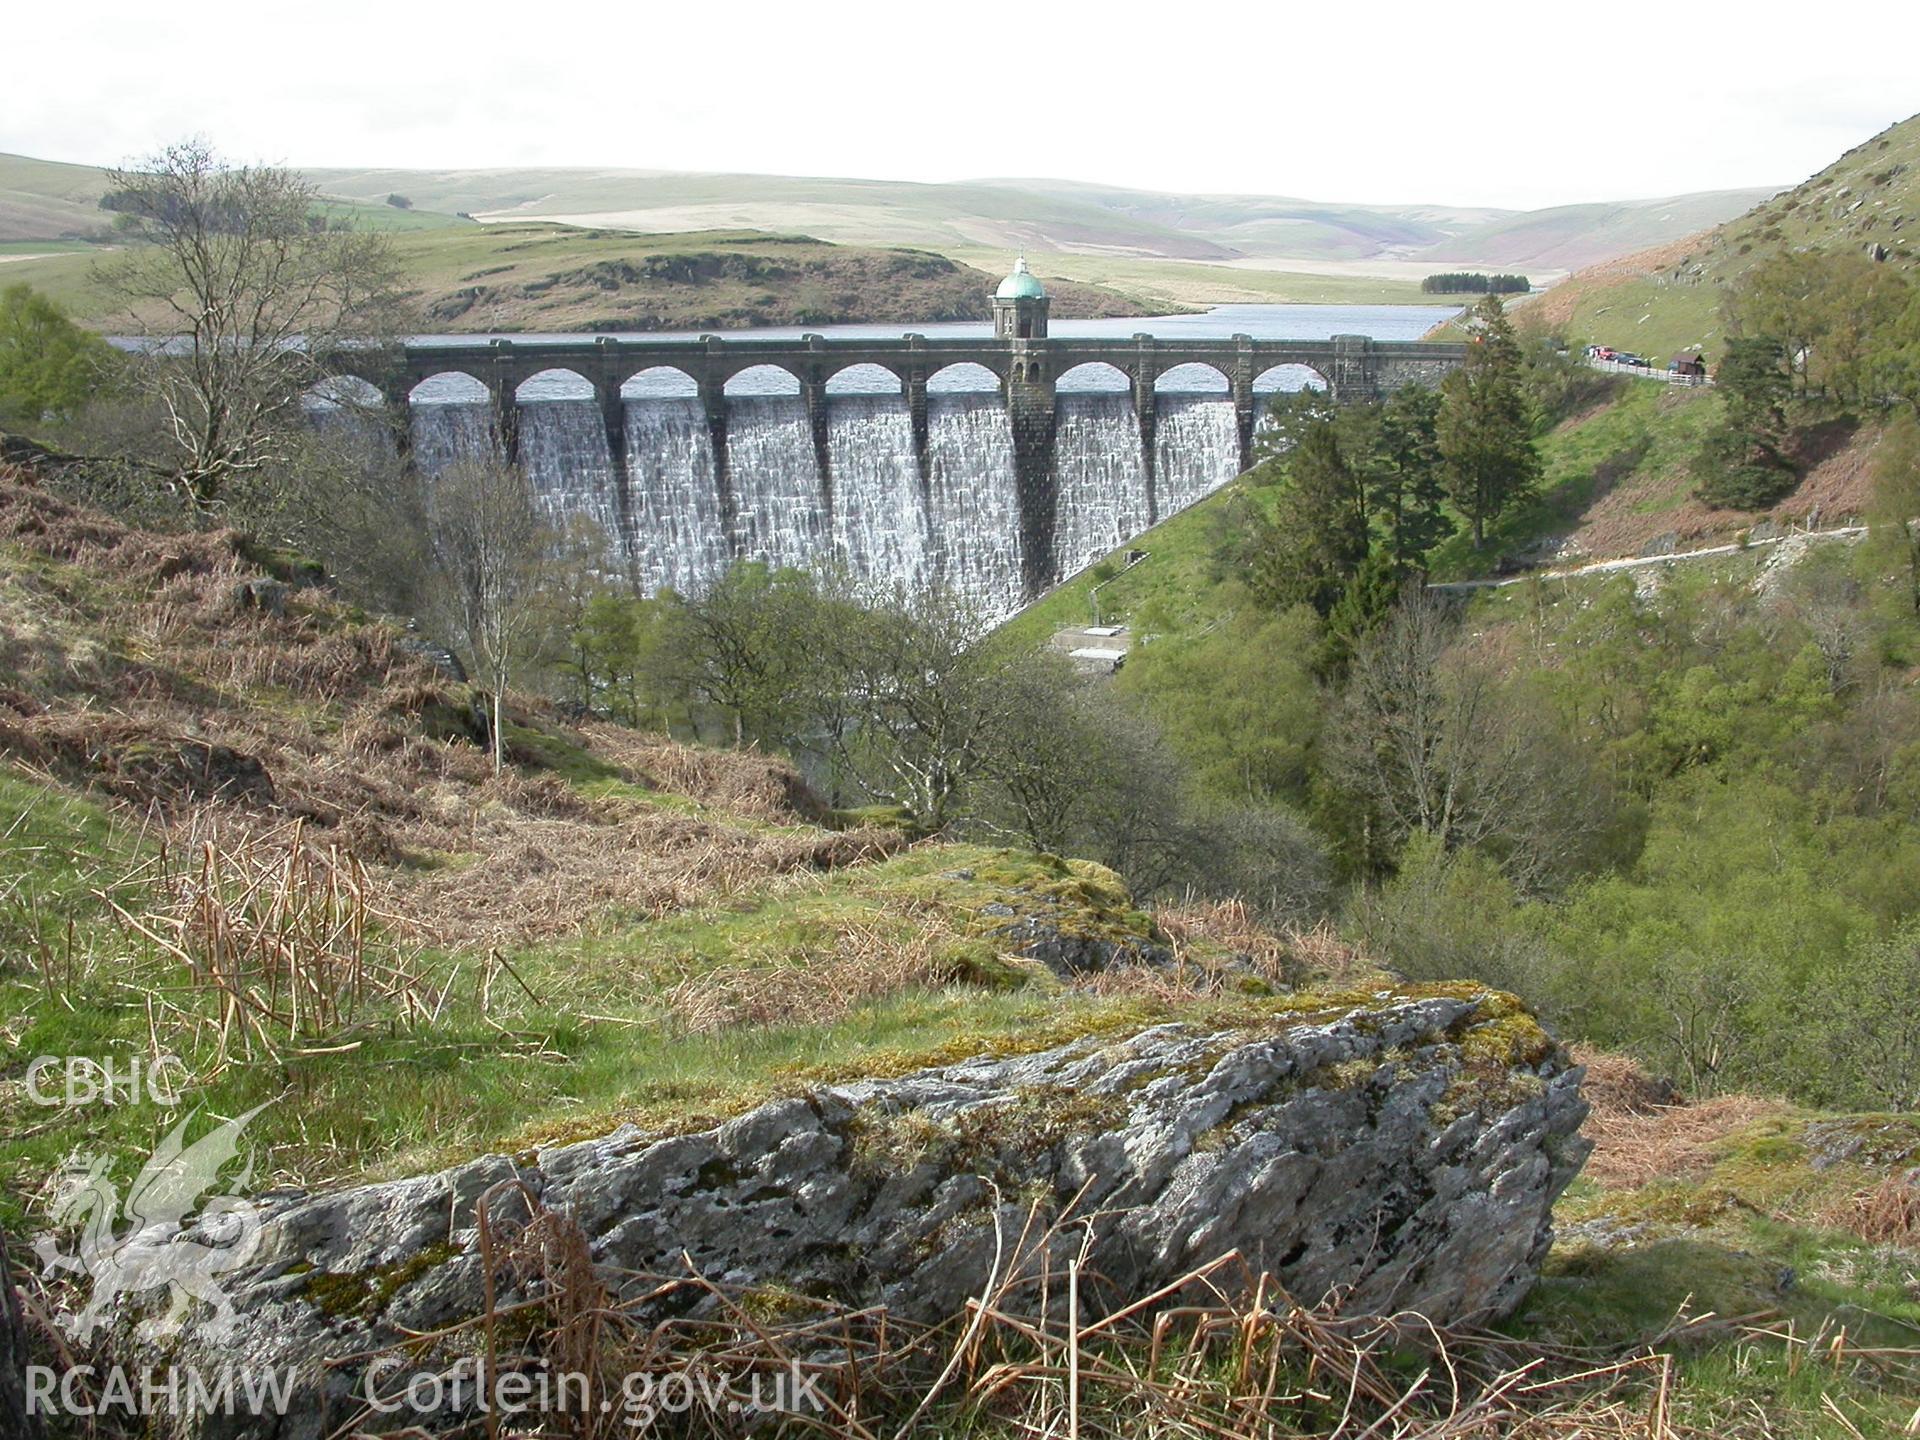 Downstream face of dam from south-west with the Craig Goch Reservoir beyond.